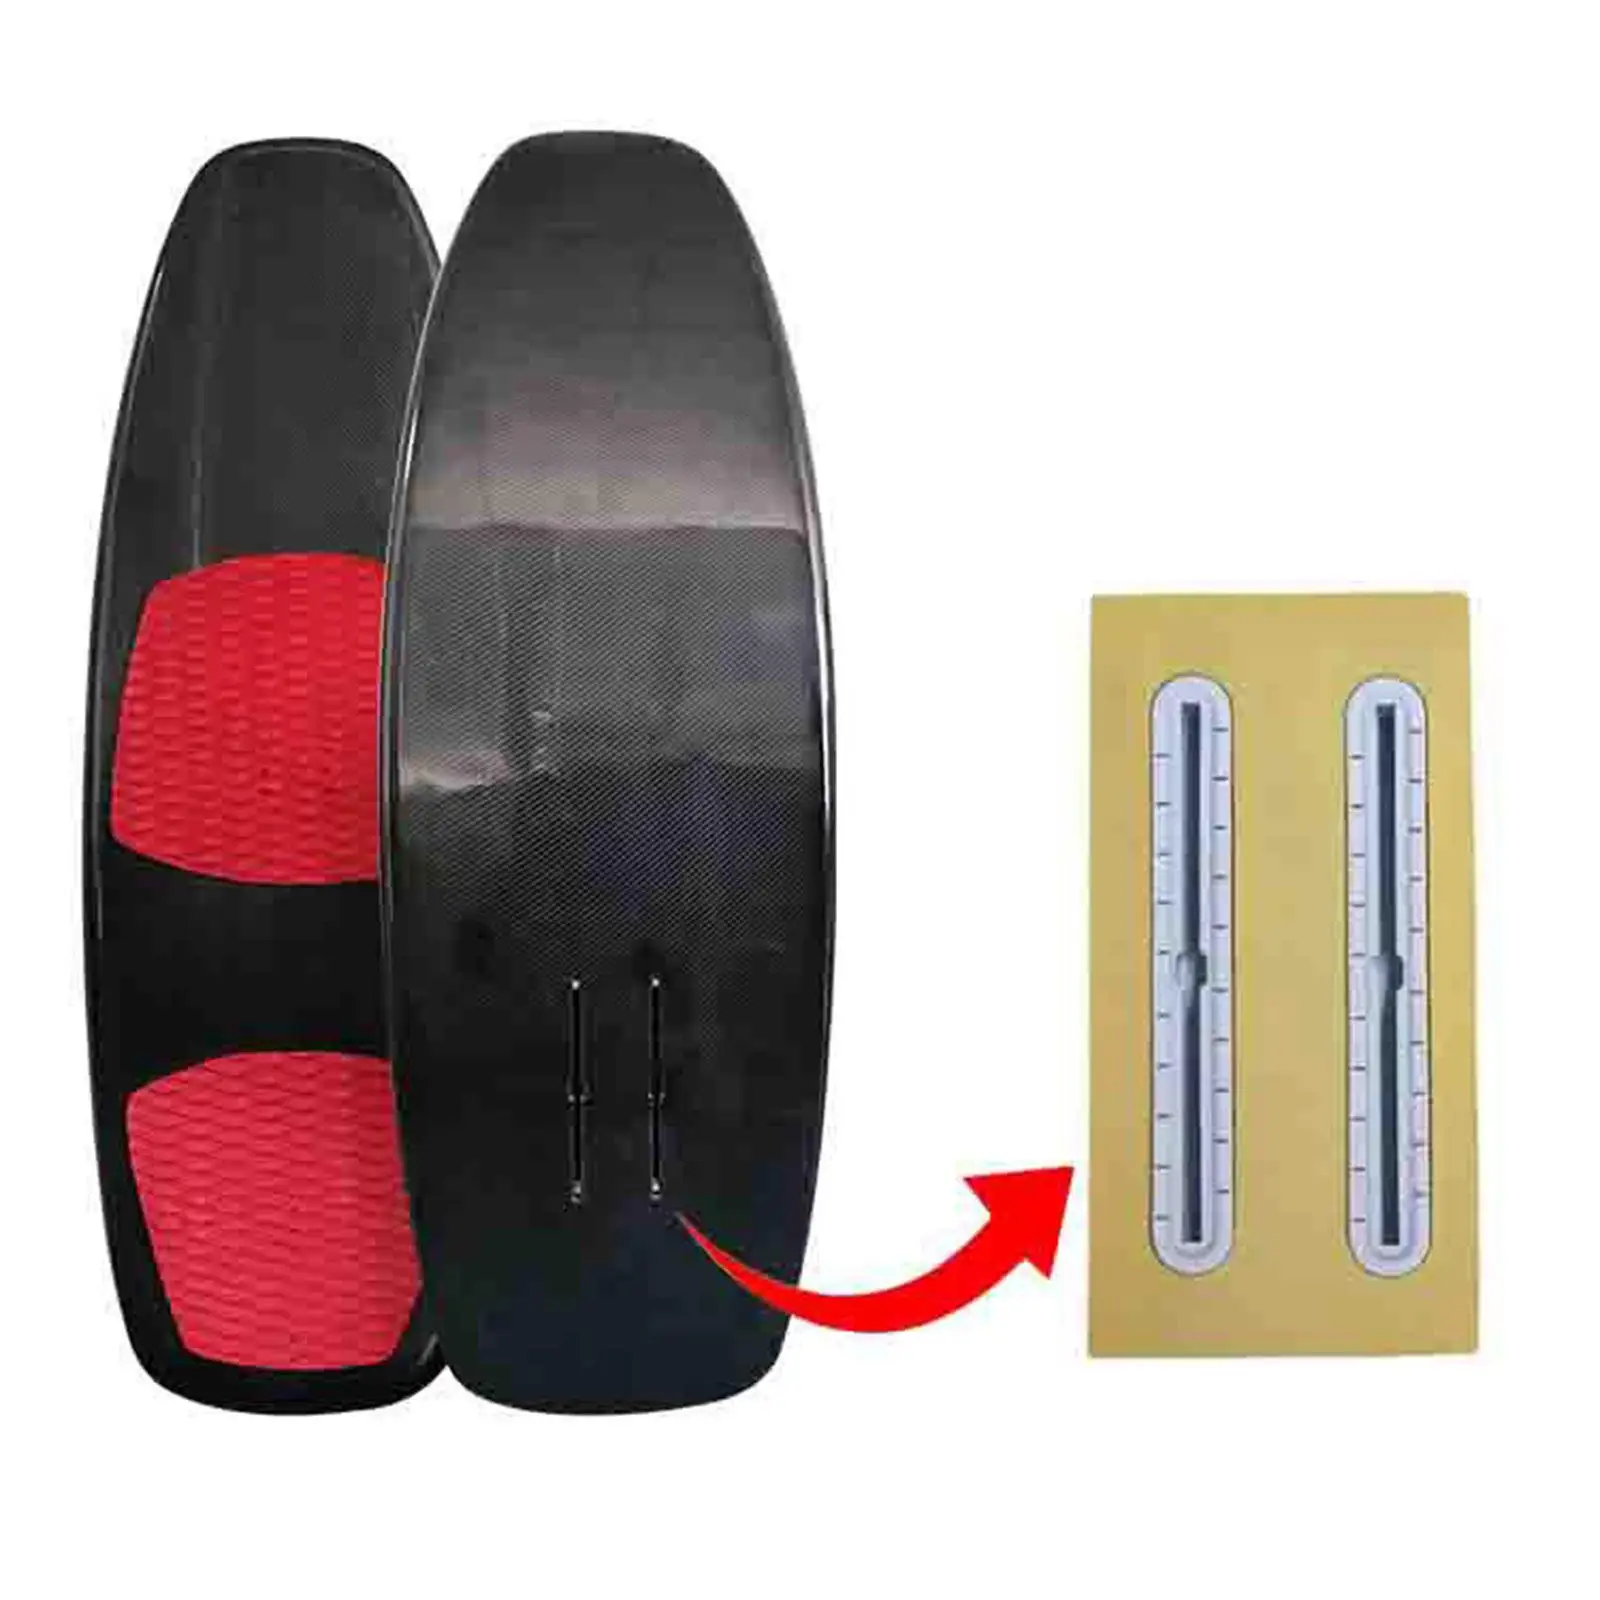 Surfboard Fins Box Universal Reinforced Hydrofoil Rail Box for Water Sports Wakeboard Stand up Paddleboard Surf Accessories